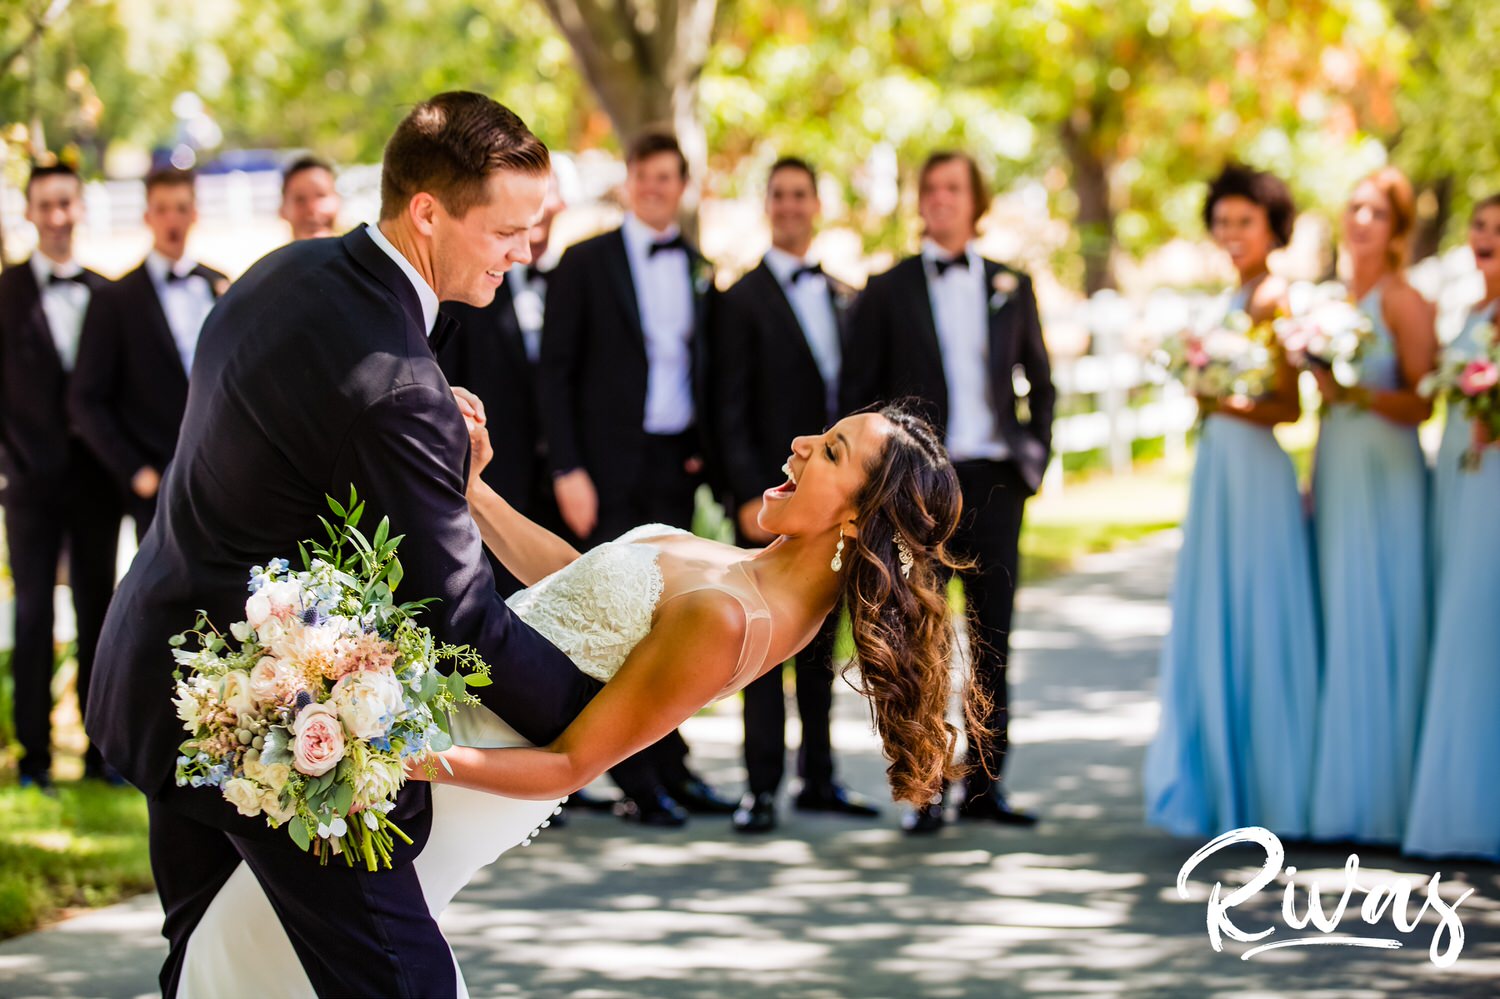 Saddlerock Ranch Summer Wedding | Destination Wedding Photographers | Rivas | A candid image of a groom dipping his bride in front of their bridal party on their wedding day at Saddlerock Ranch in Malibu. 